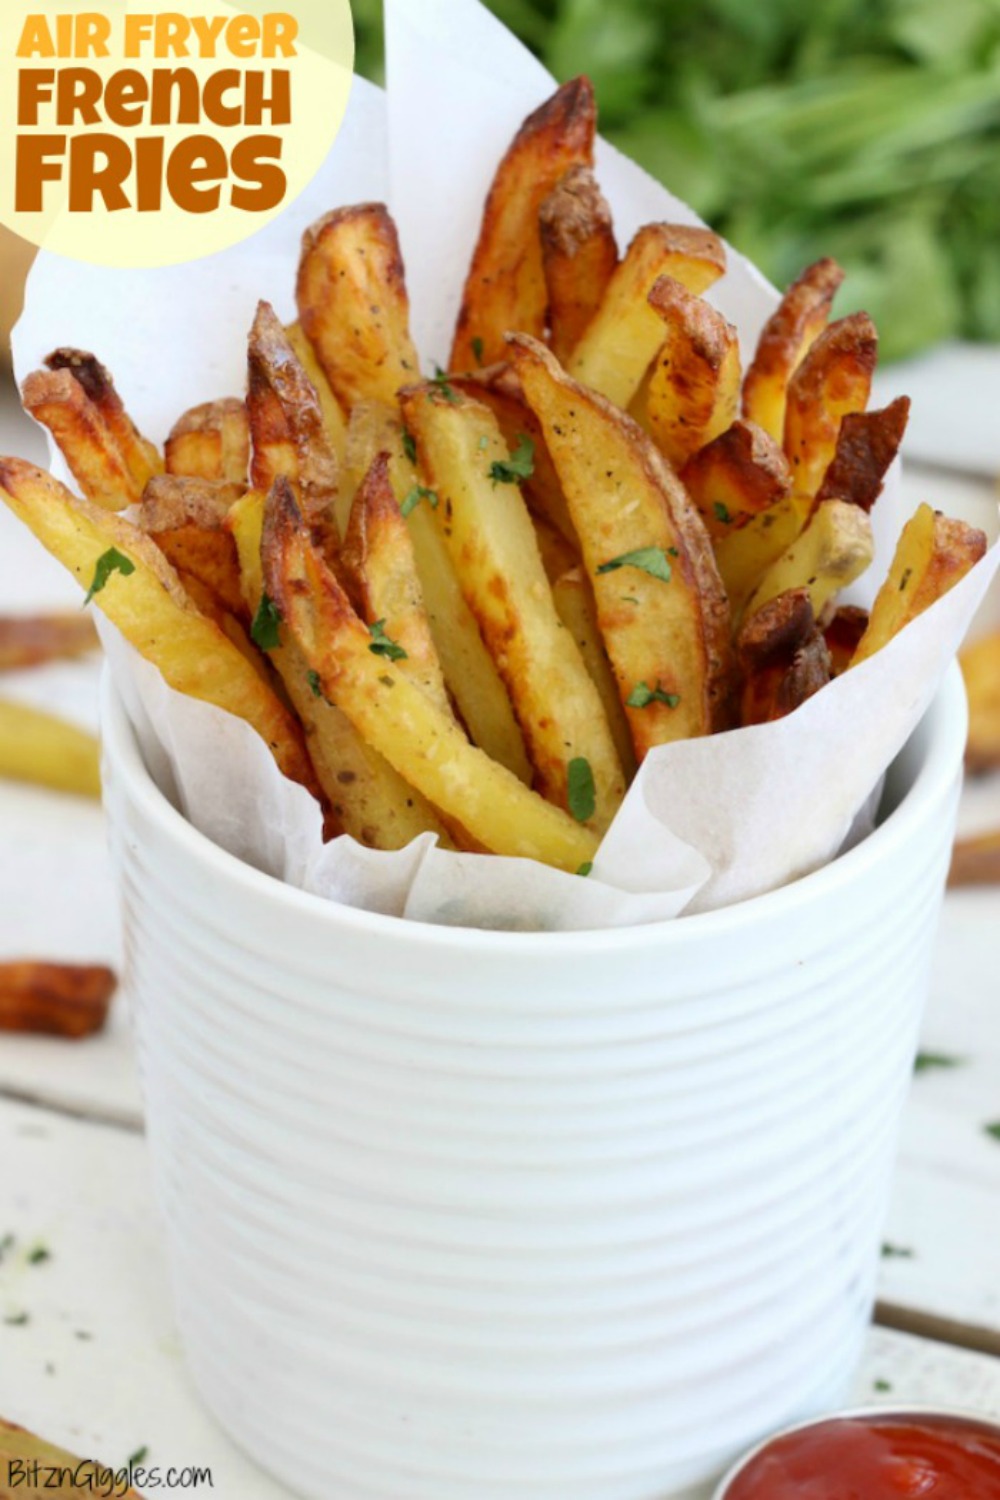 Air Fryer French Fries - Delicious hand cut fries made in the air fryer with 75% less fat than deep frying!